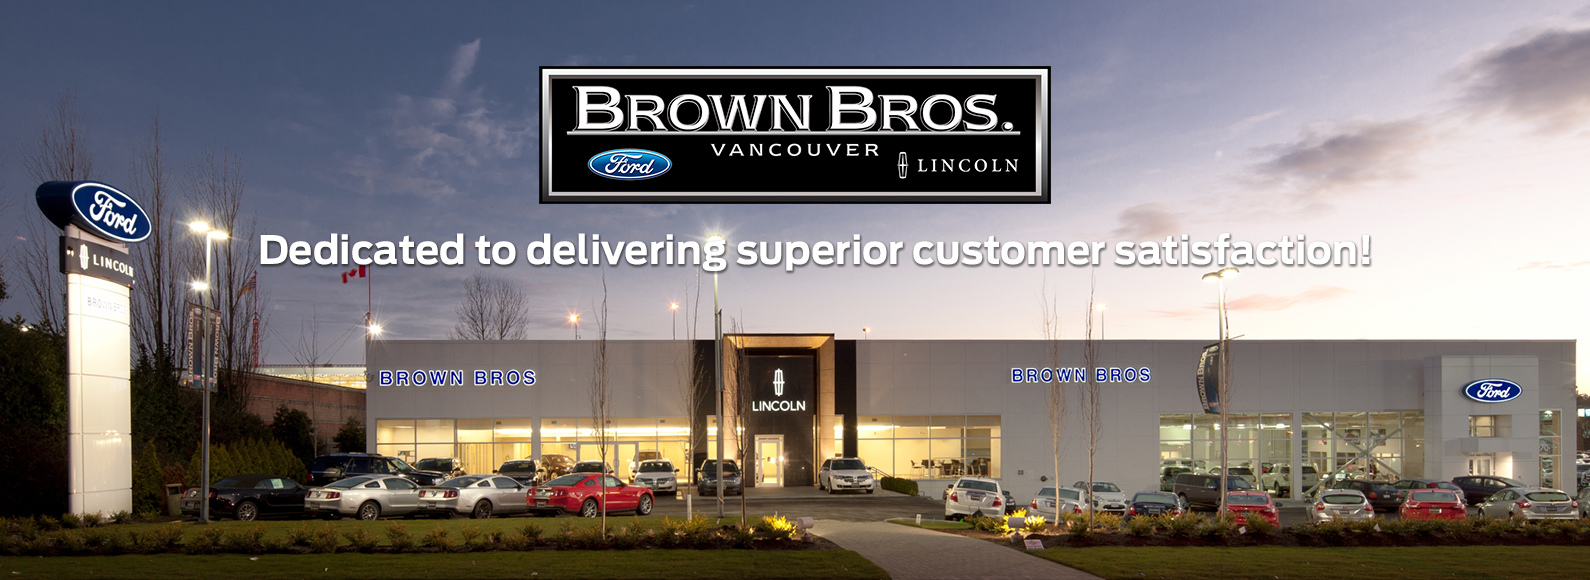 Brown bros ford inventory #8